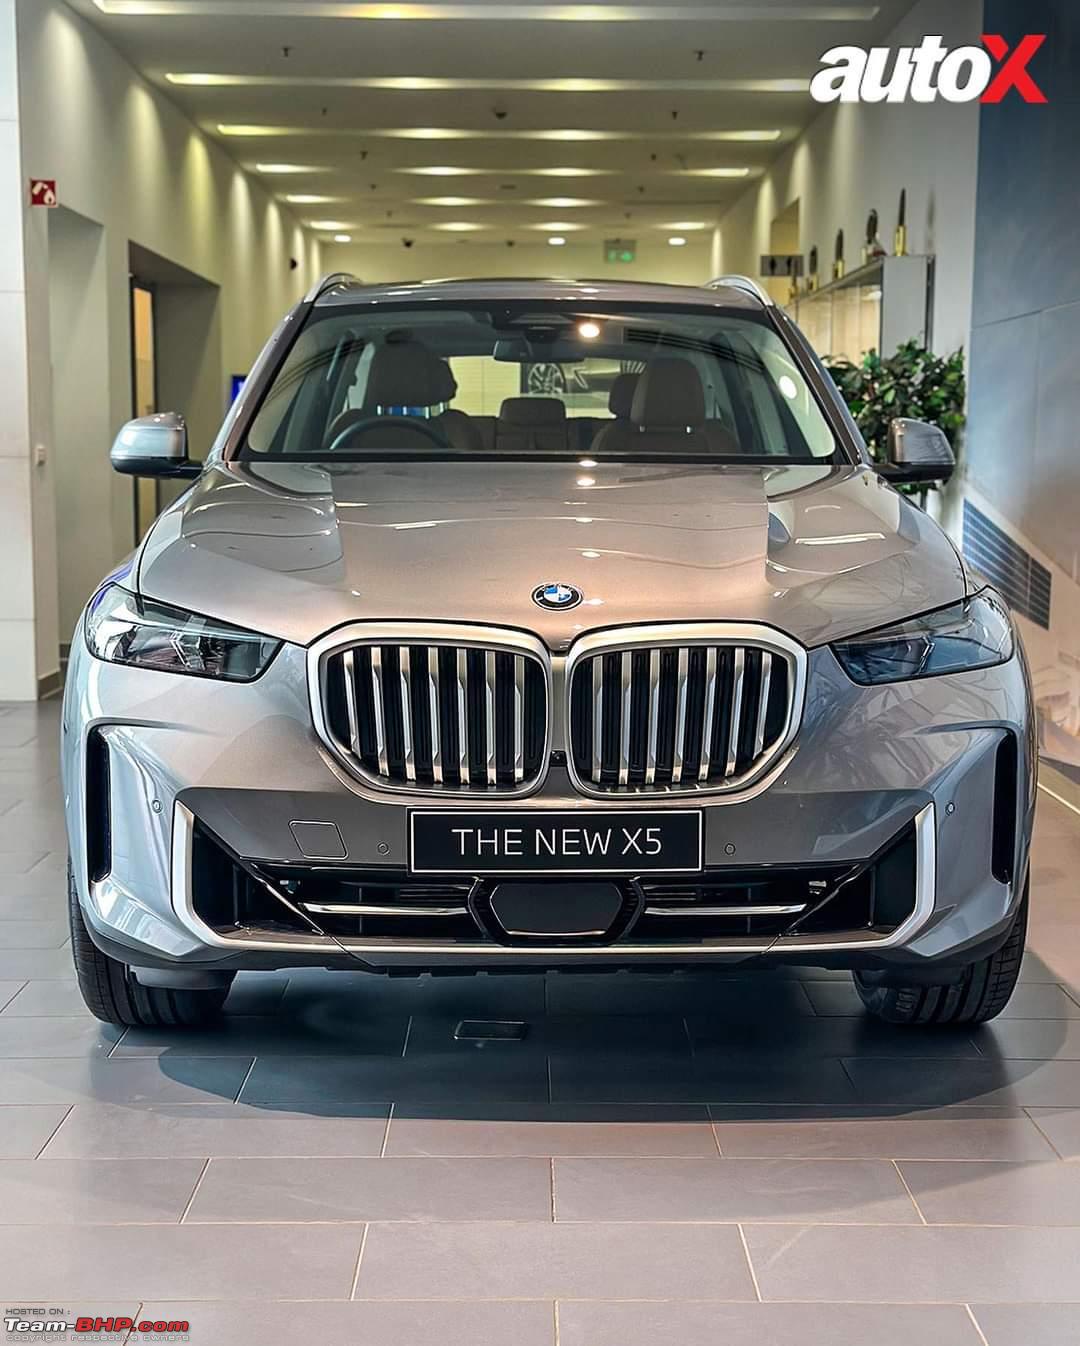 BMW X5 Facelift launched at Rs. 93.90 lakh - Page 2 - Team-BHP